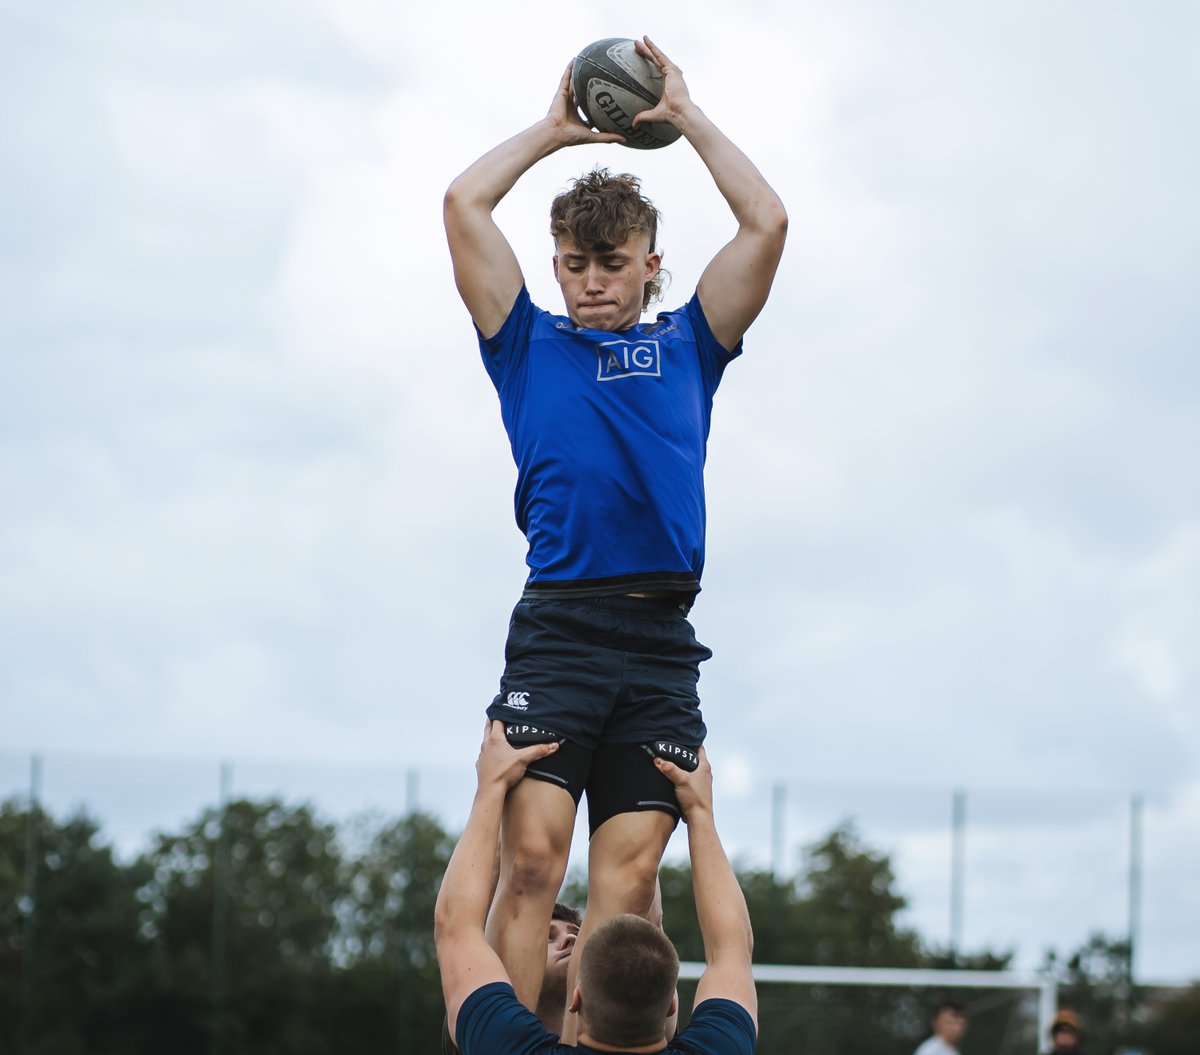 📢 We are looking for host families for our rugby students who require accommodation during term-time 🏉 The weekly tariff is £110 for seven days and nights and includes breakfast and an evening meal.